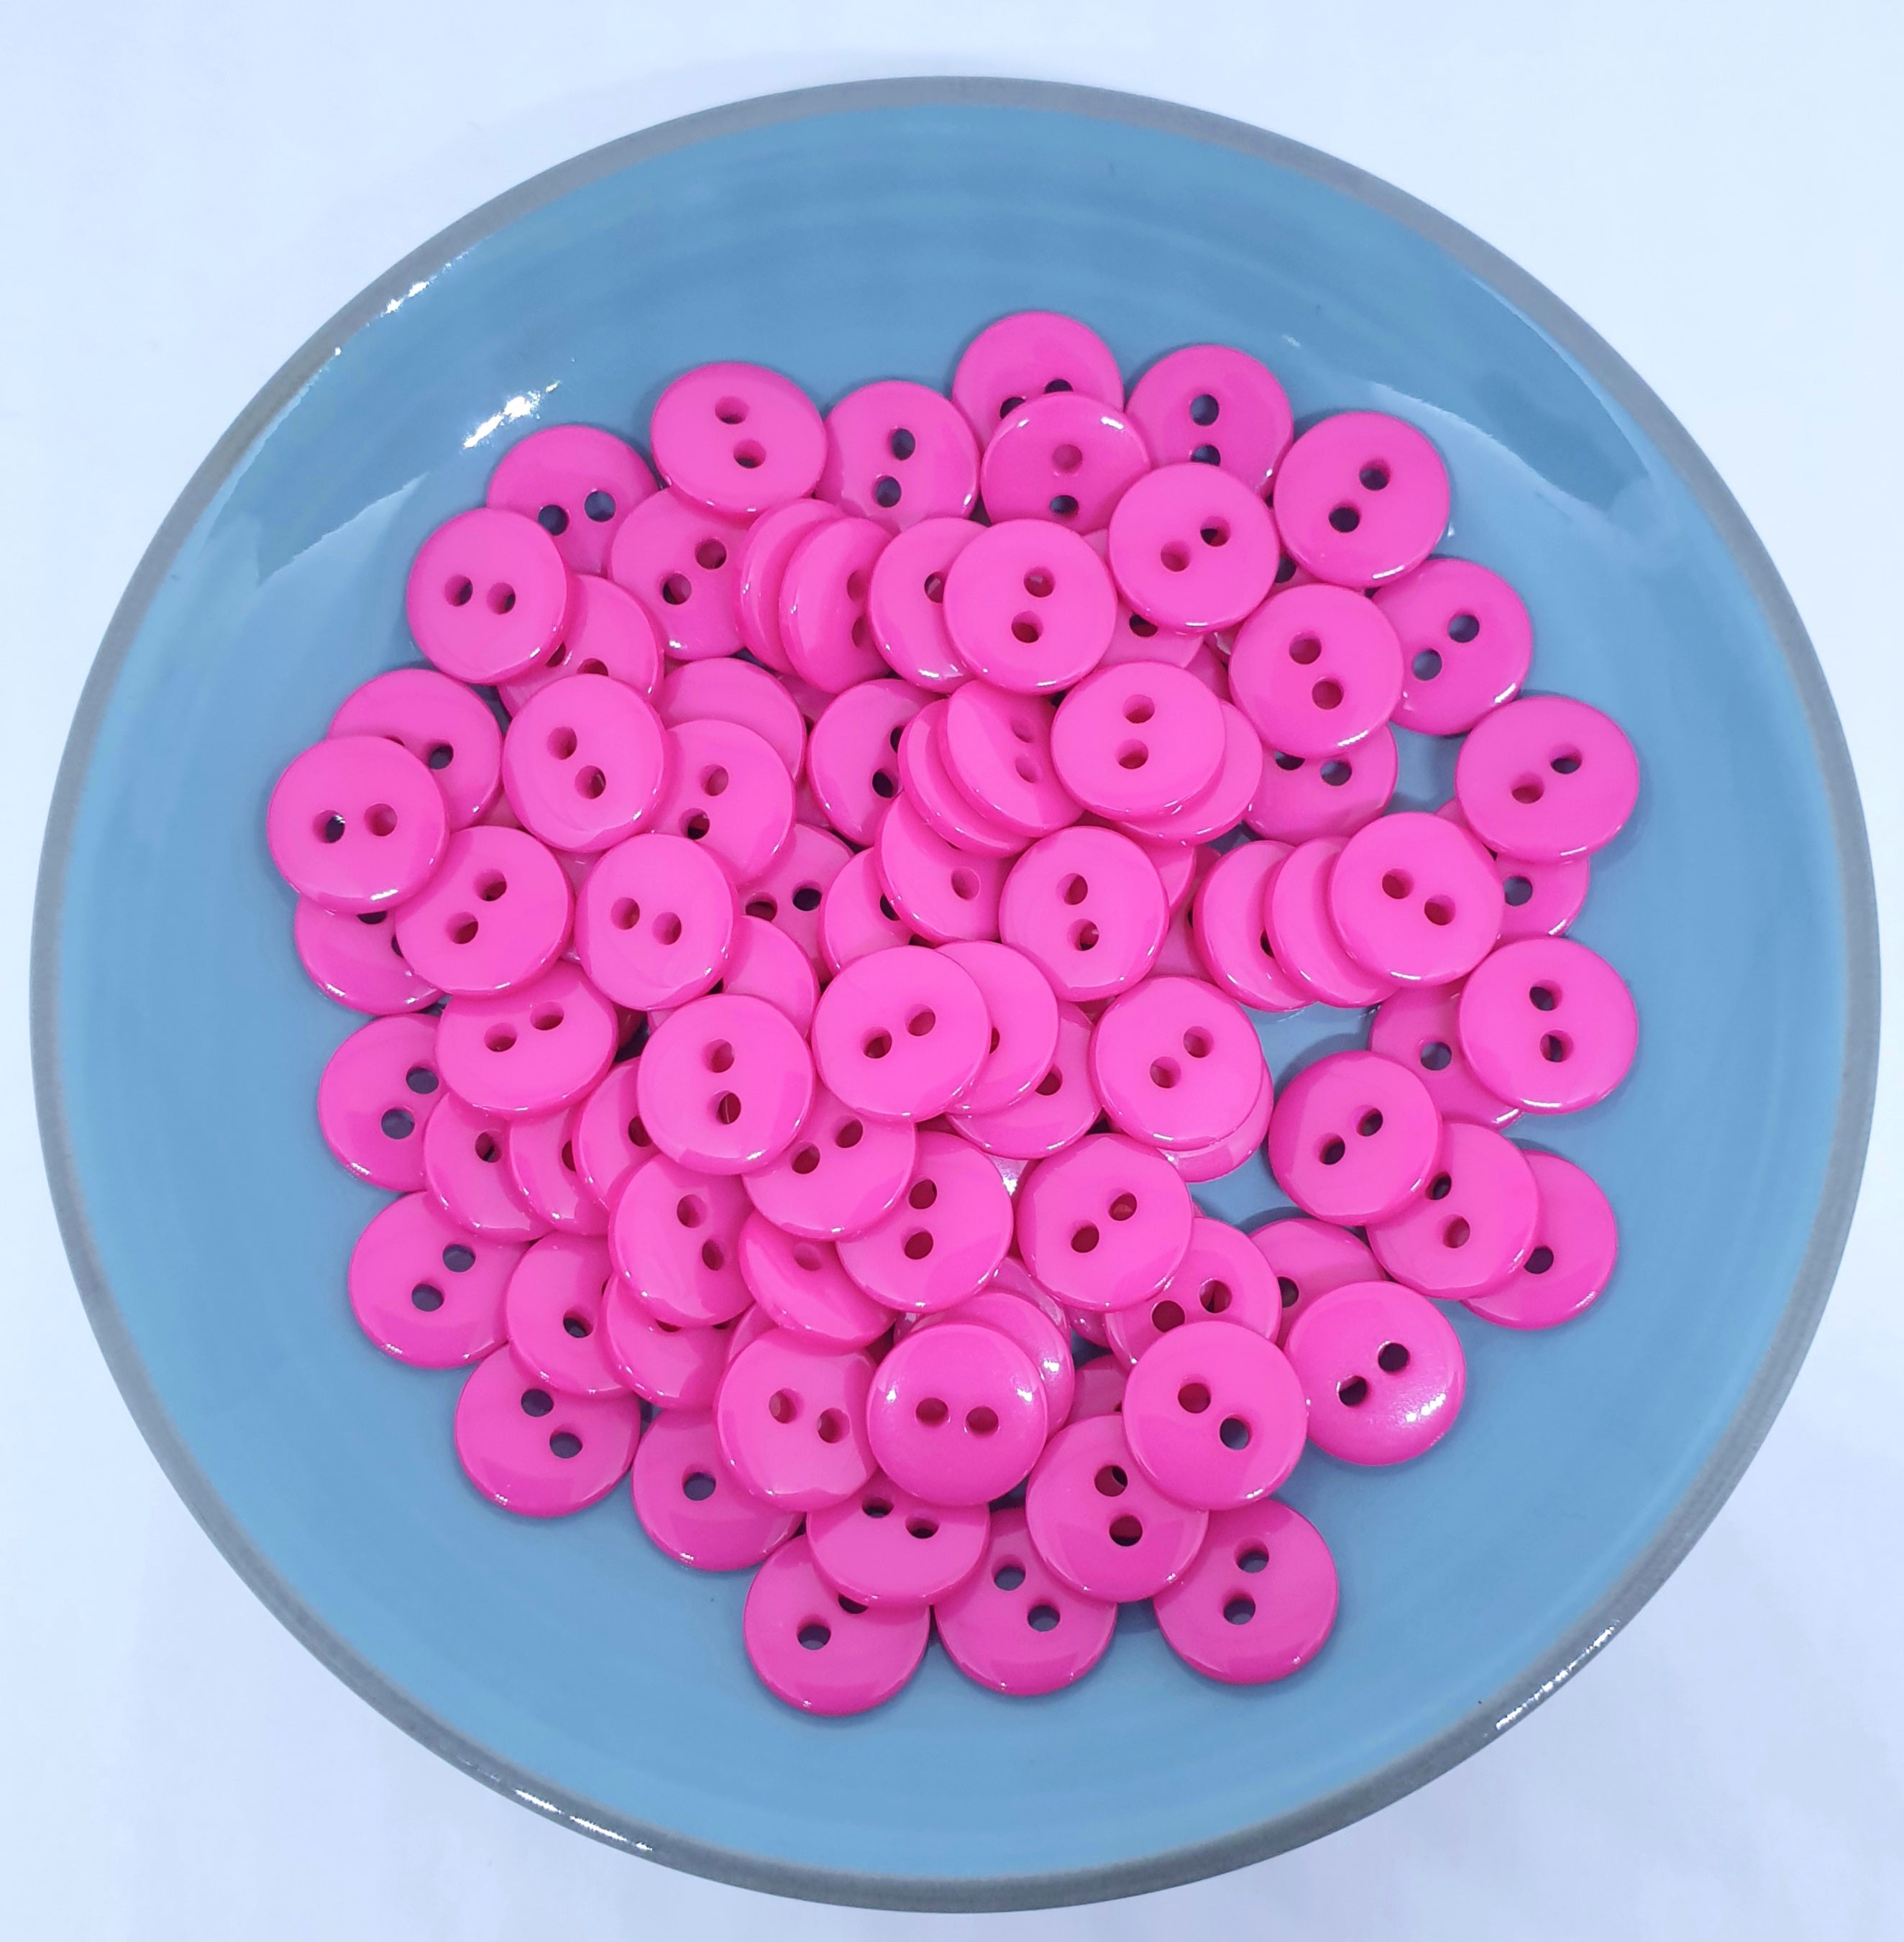 MajorCrafts 120pcs 10mm Dark Pink 2 Holes Small Round Resin Sewing Buttons B5